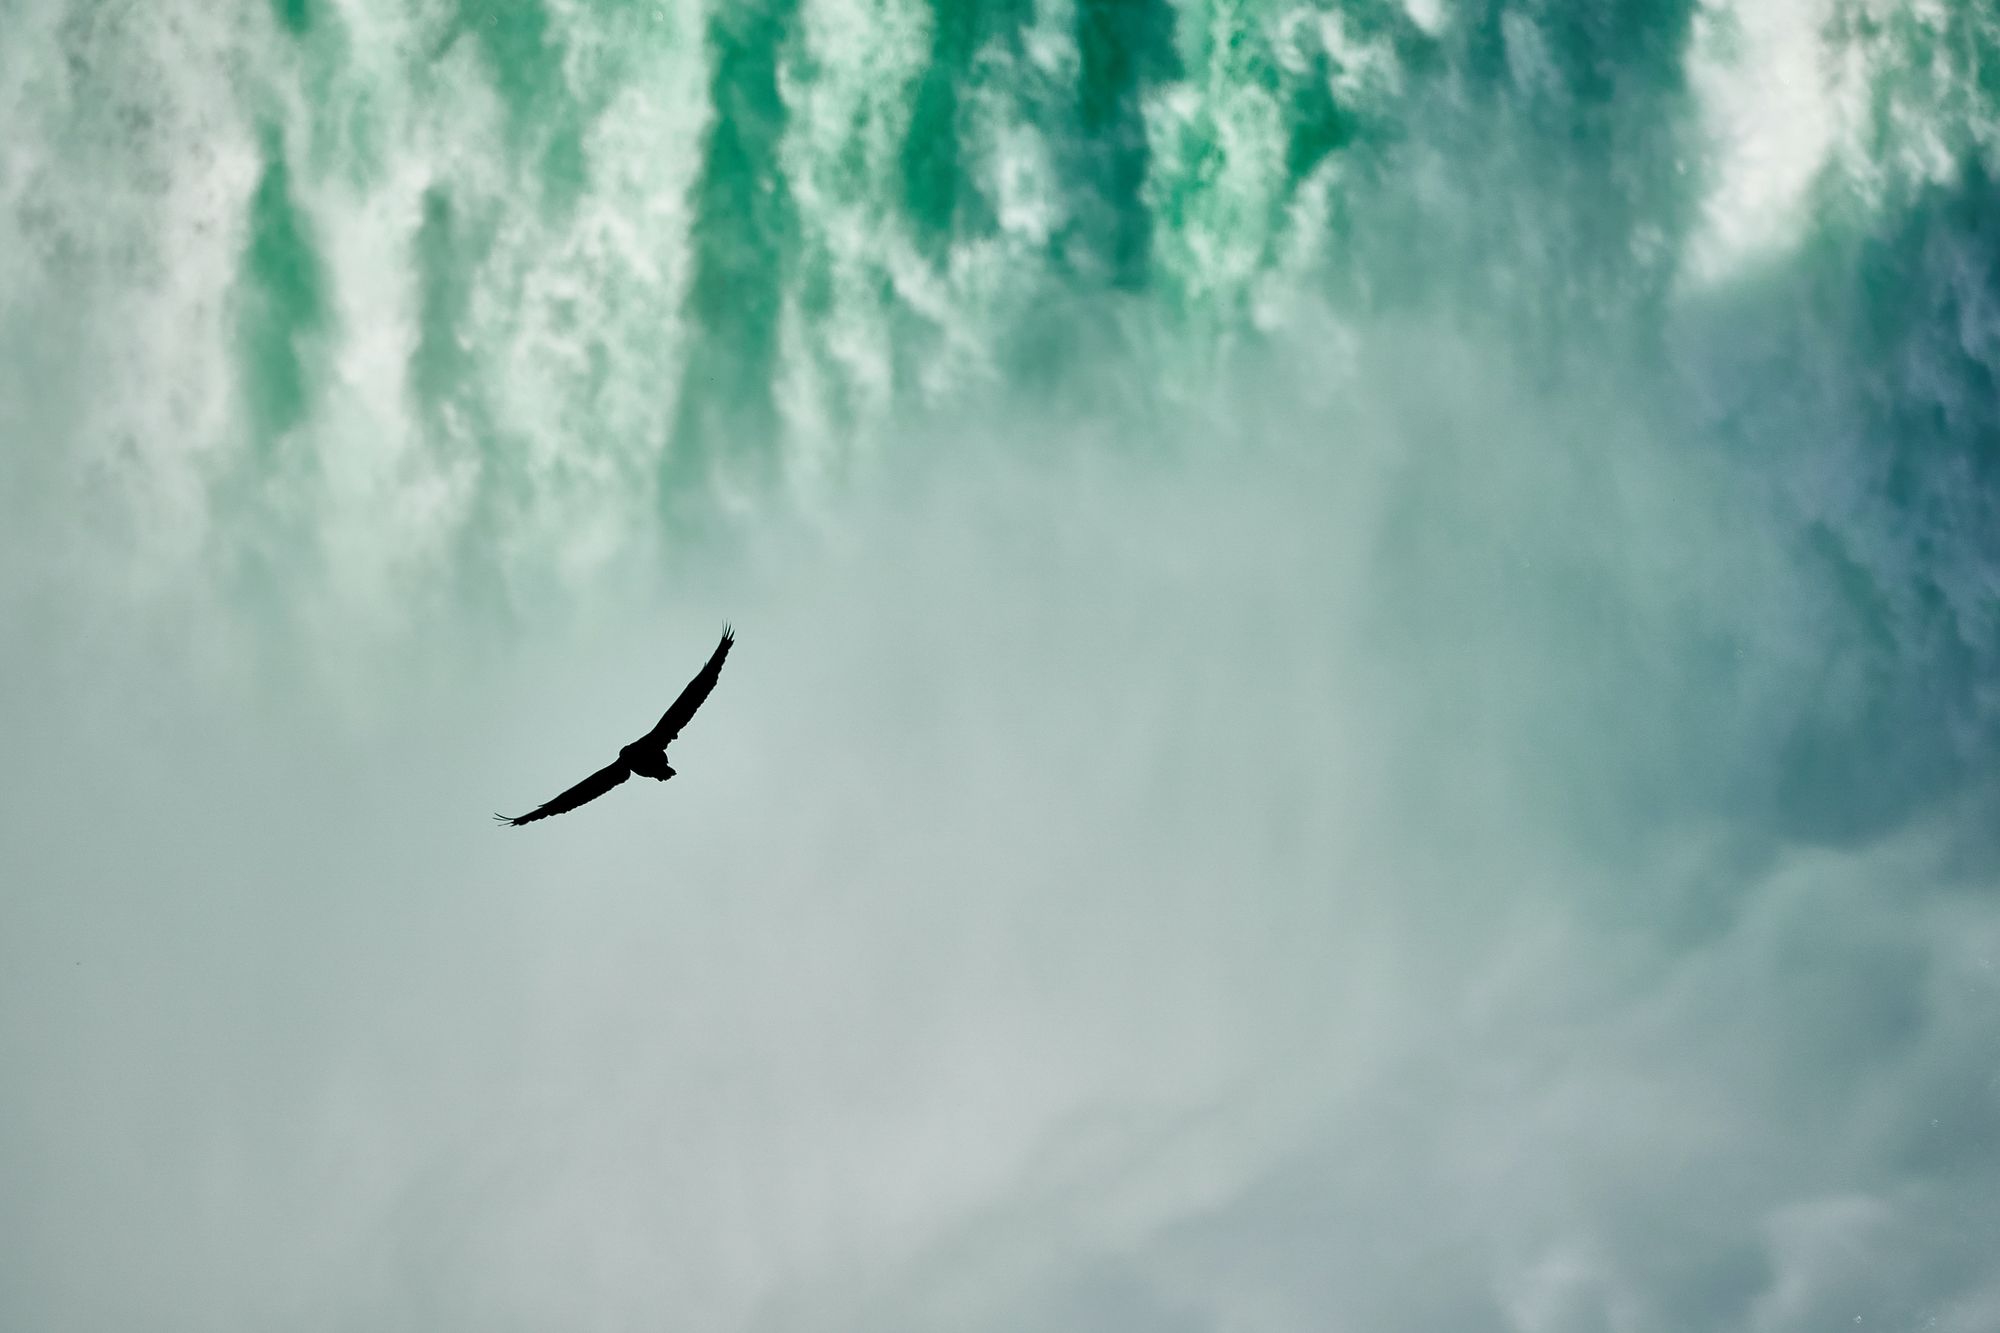 The silhouete of a bird flying and a waterfall behind it.